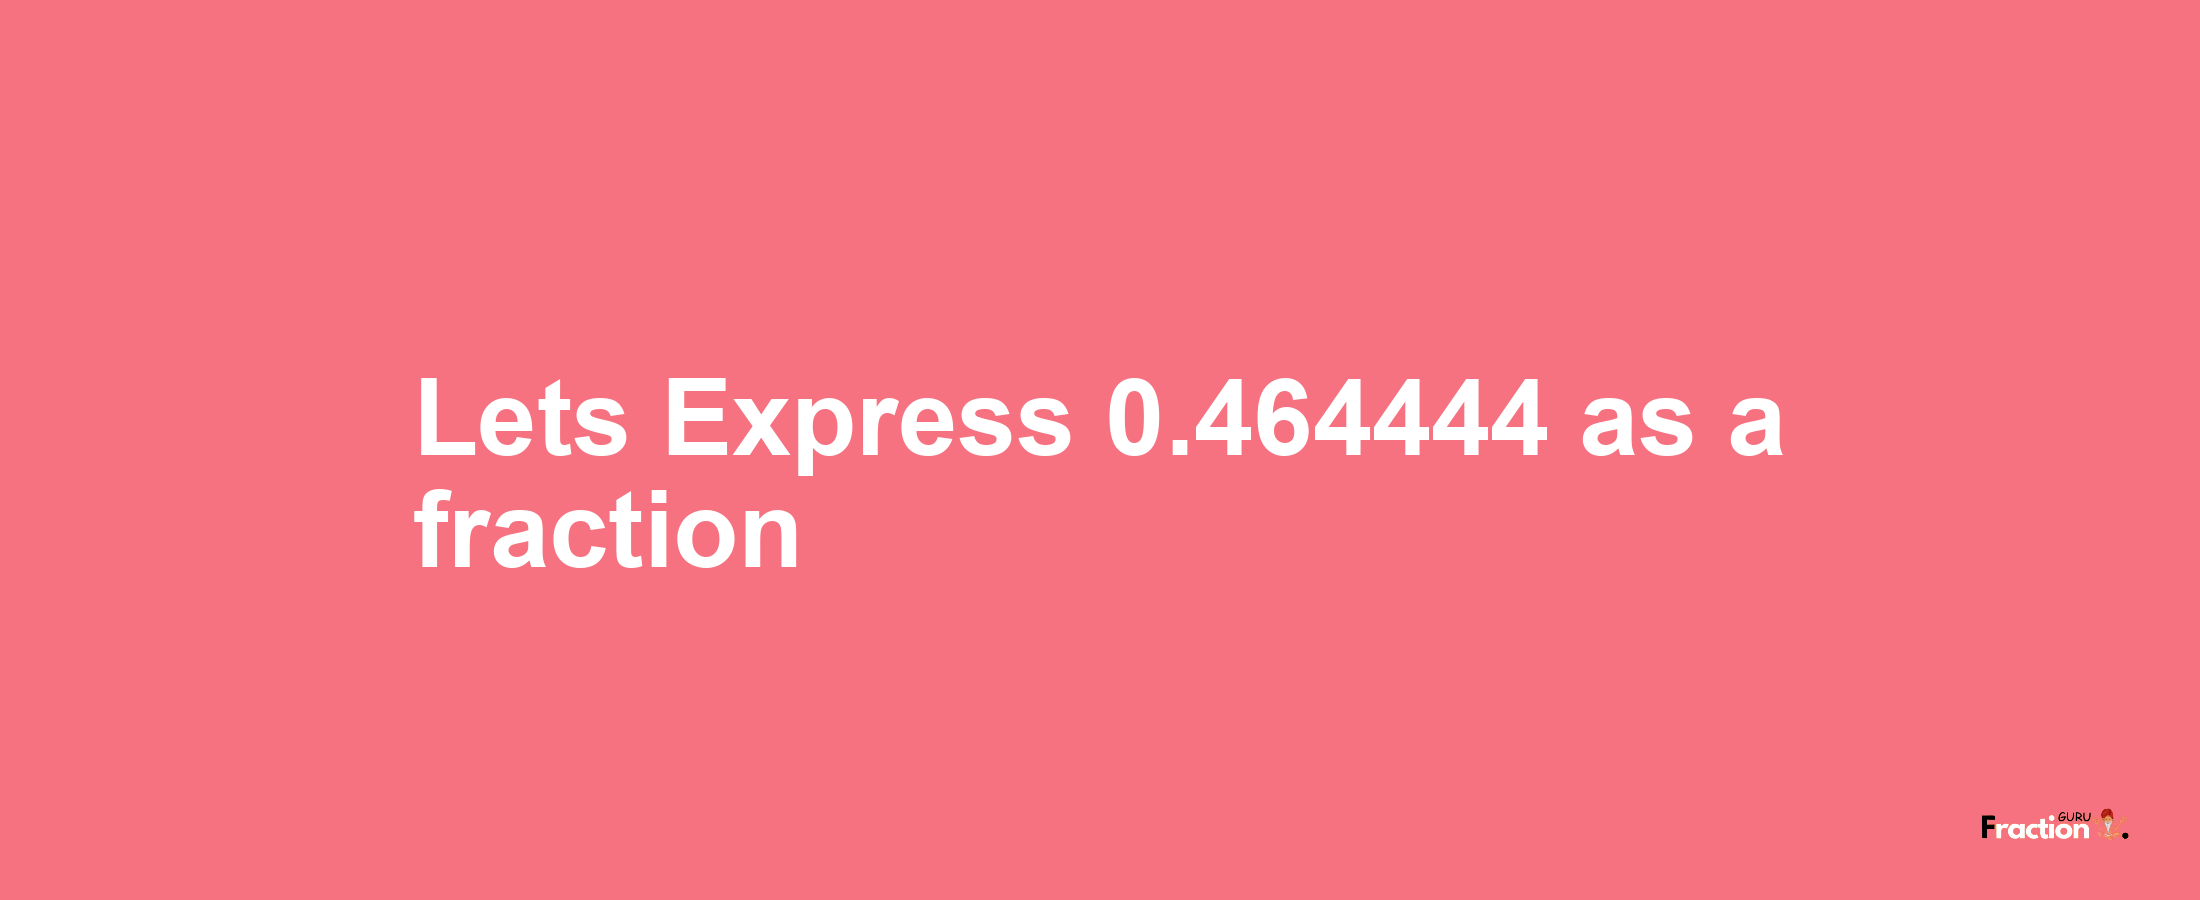 Lets Express 0.464444 as afraction